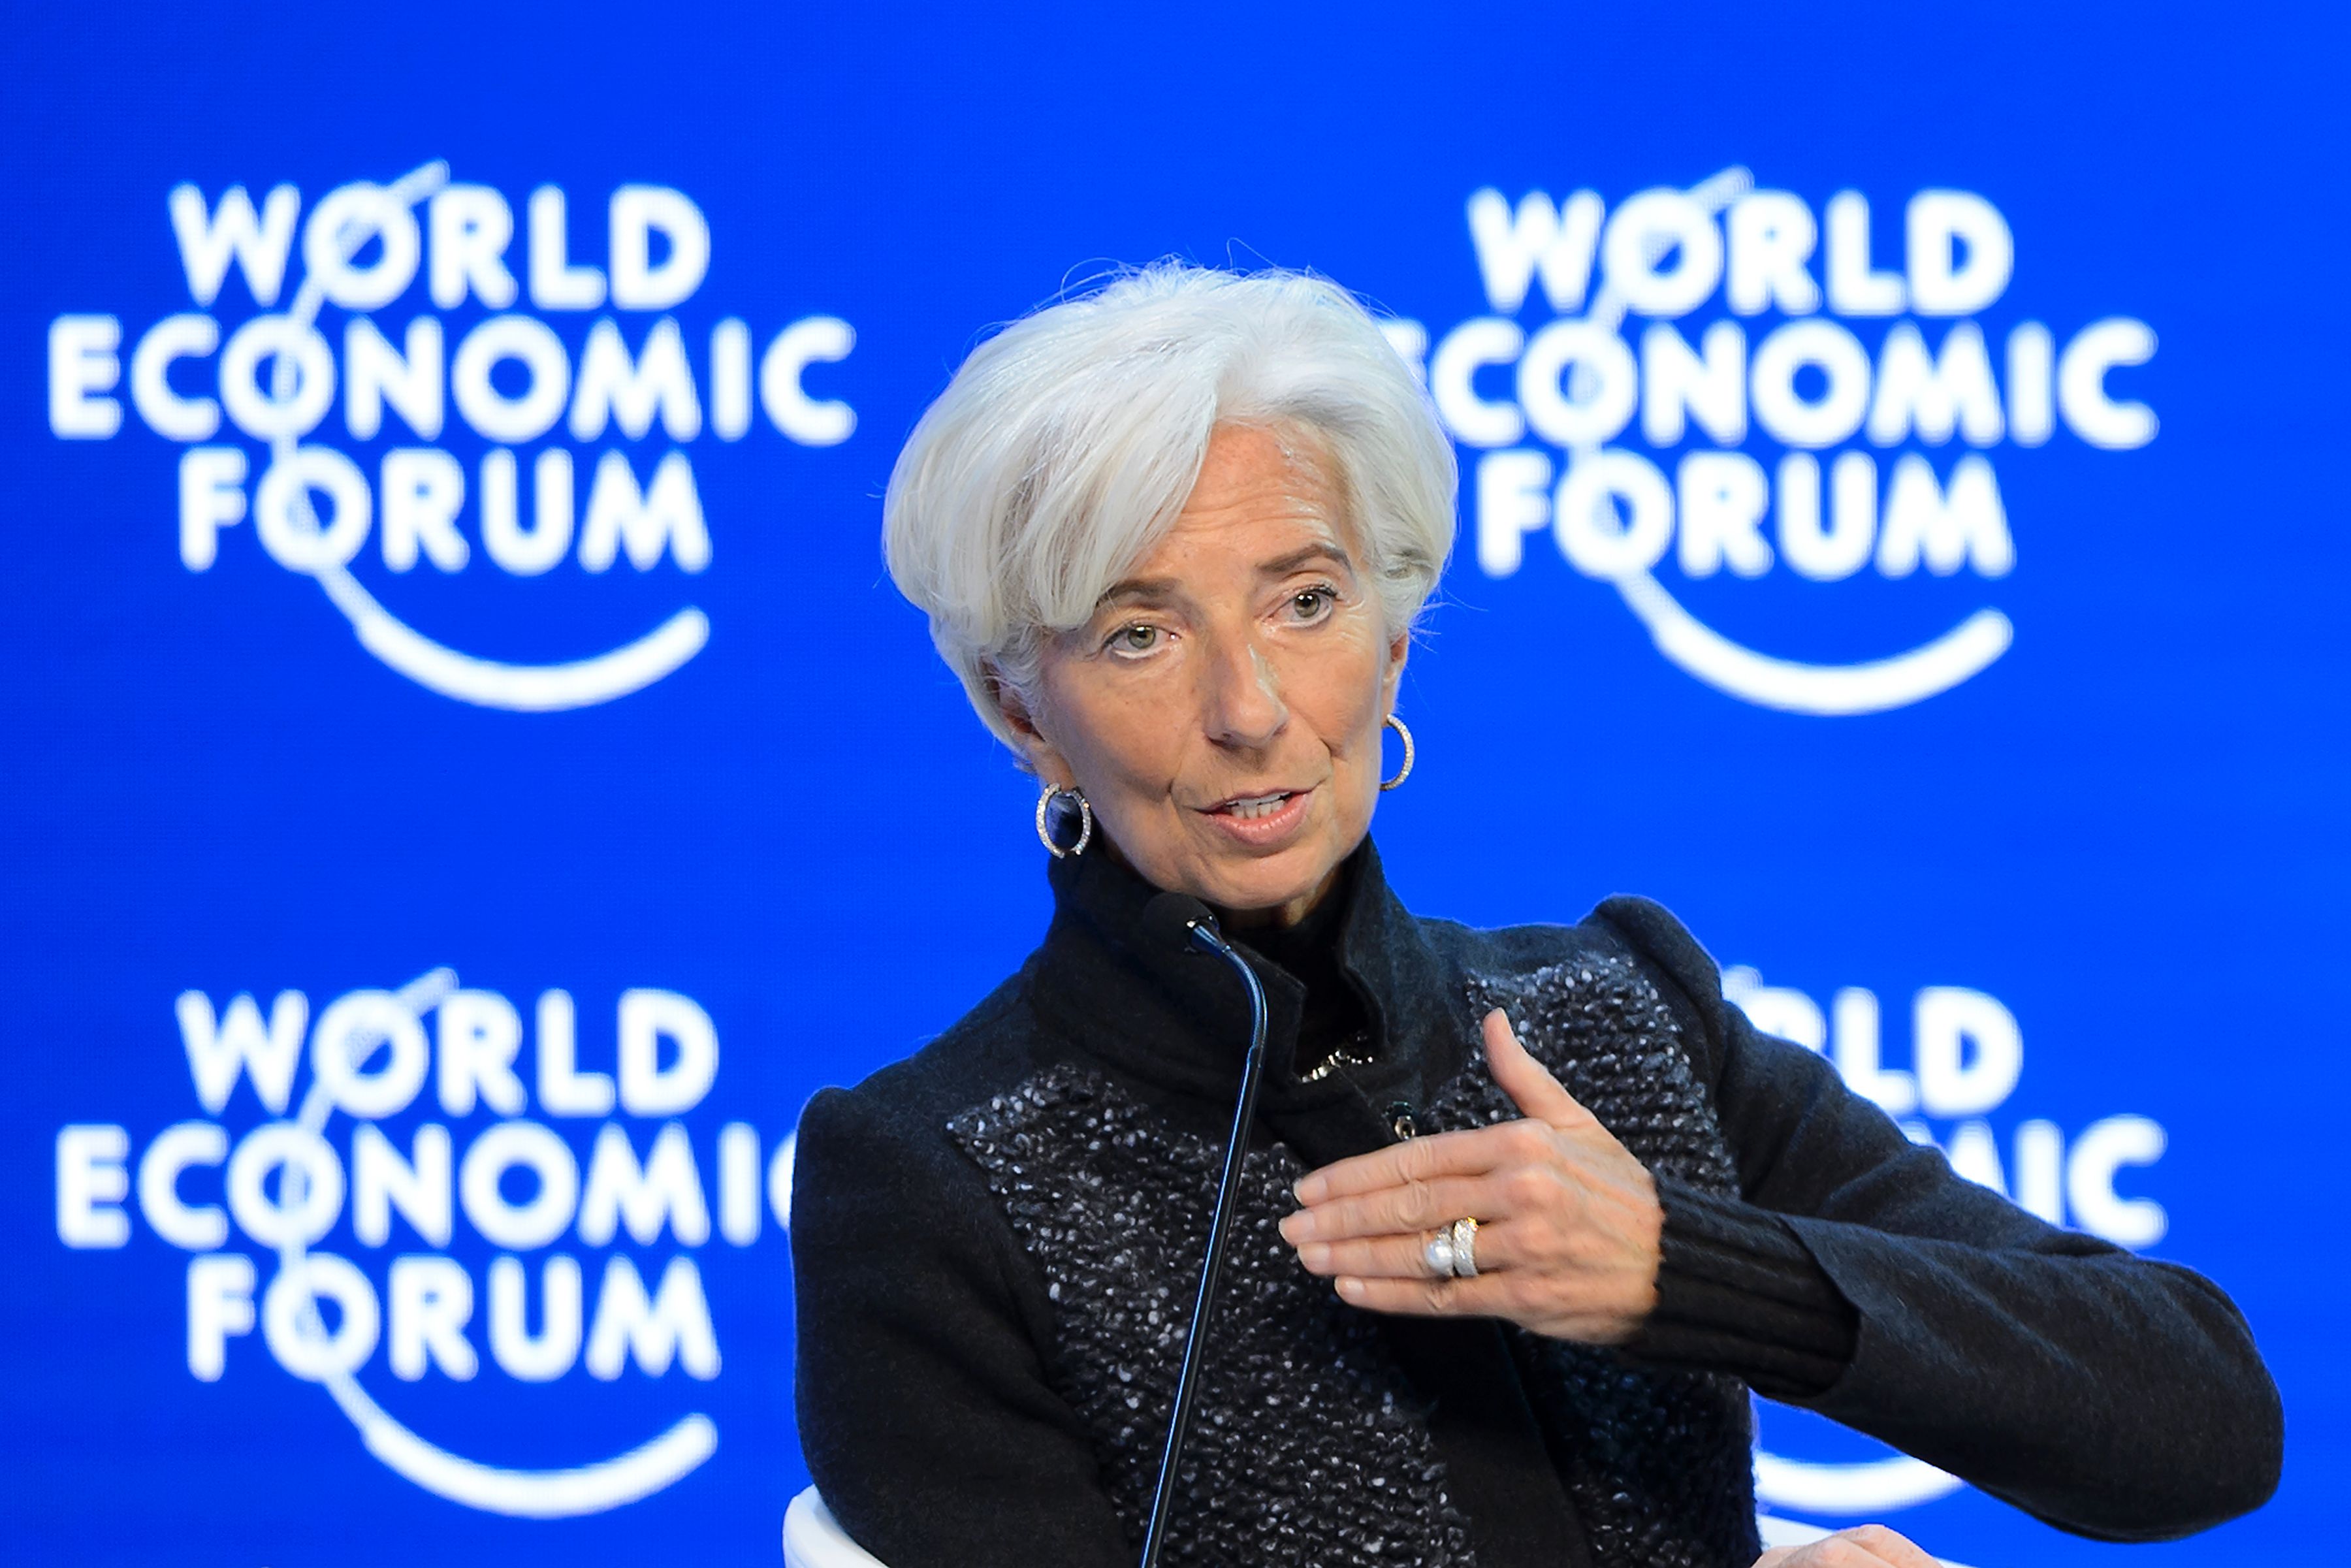 IMF Managing Director Christine Lagarde gestures during a session of the World Economic Forum annual meeting on January 23, 2016 in Davos.